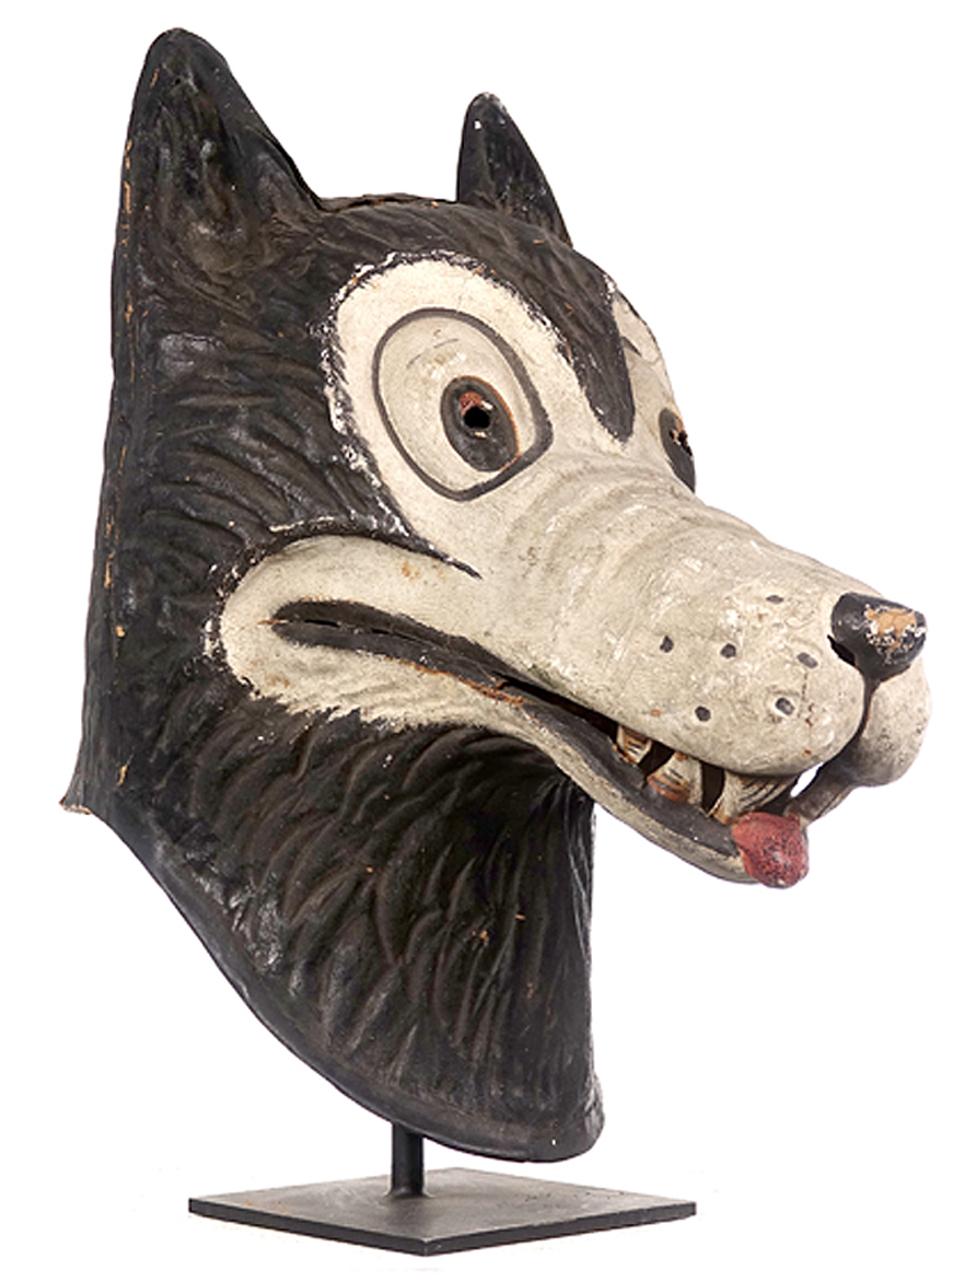 This is a Halloween wolf character helmet. I'm guessing it's 1920s and very well done. The custom made stand is included. I've been told that it could be early Disney and it really has that color and feel. When we found it that was my first thought.